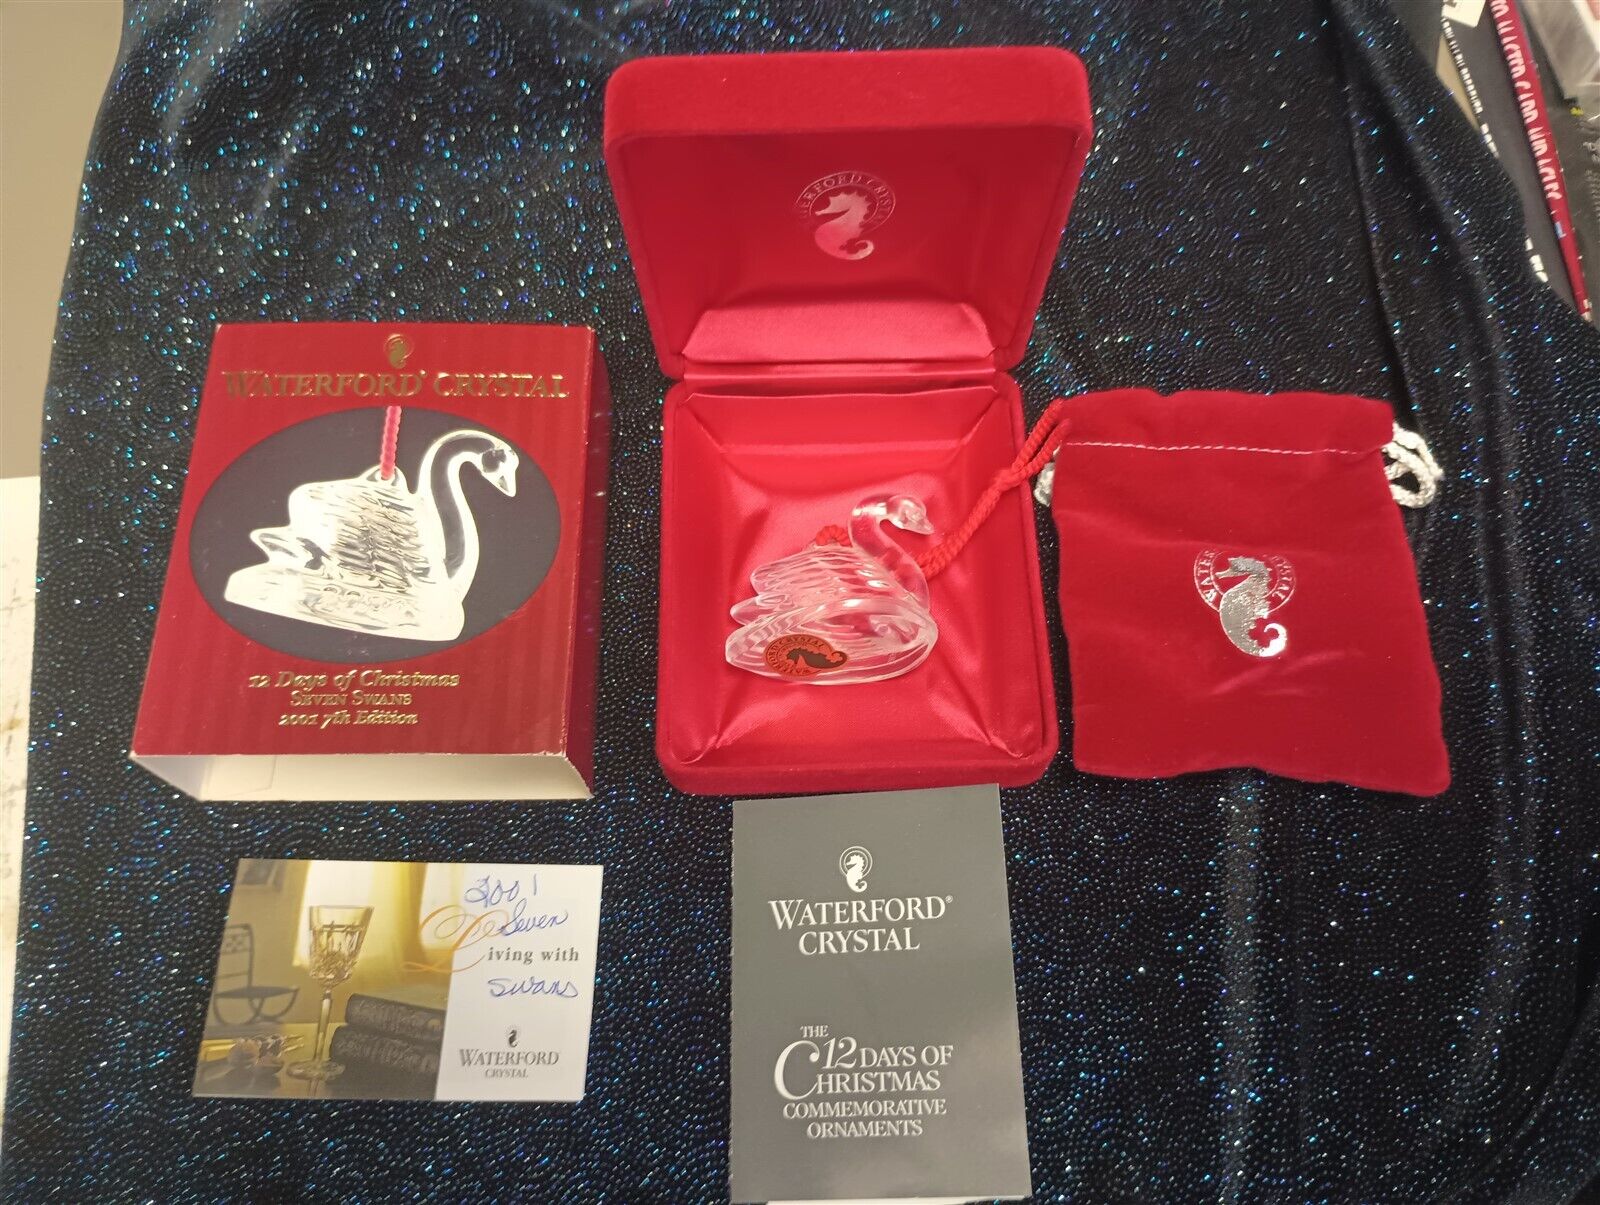 Waterford Crystal Seven Swans 12 Days Of Christmas 7th Edition Ornament 2001